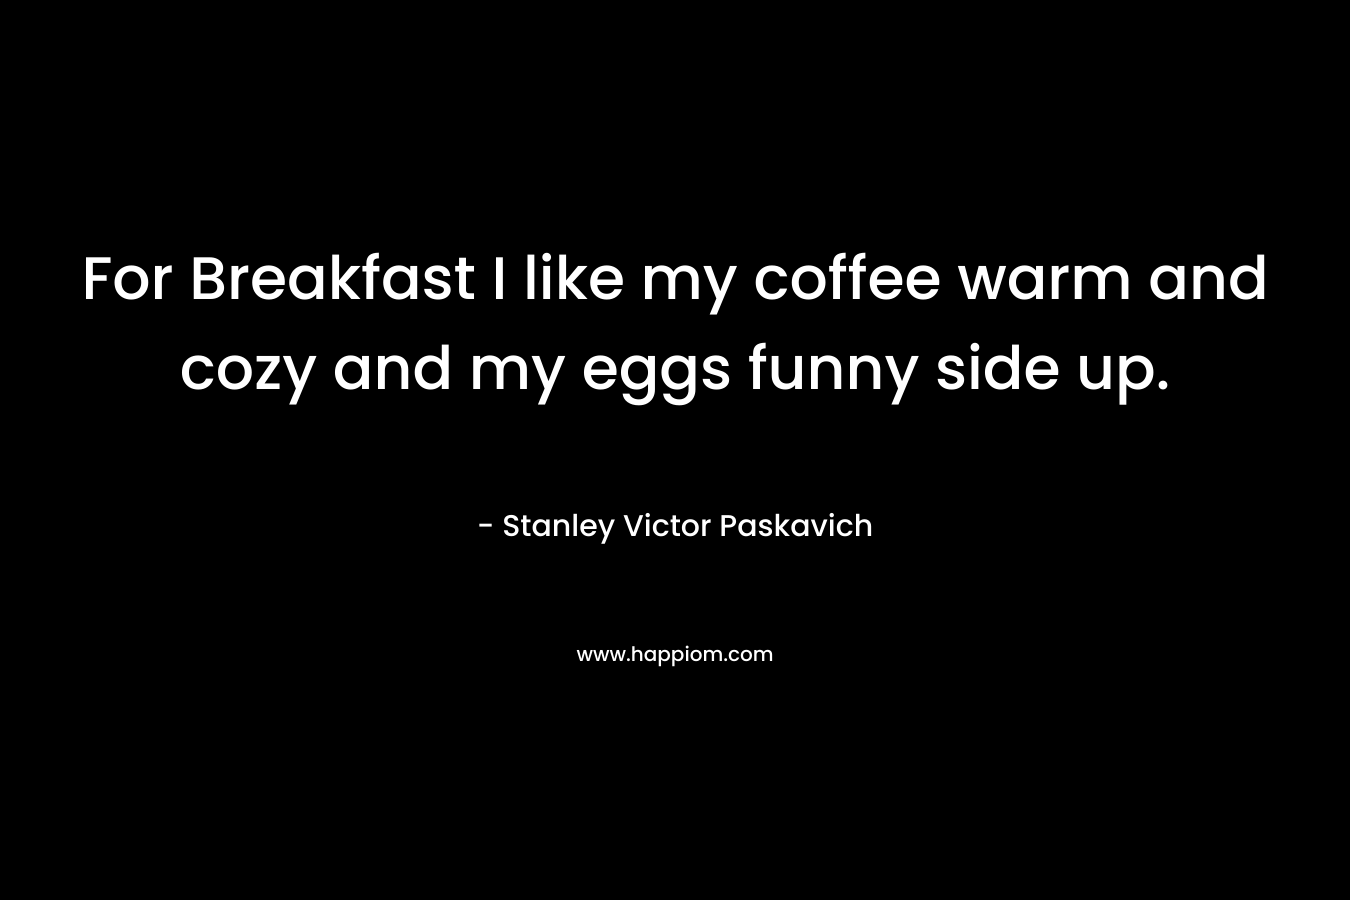 For Breakfast I like my coffee warm and cozy and my eggs funny side up.